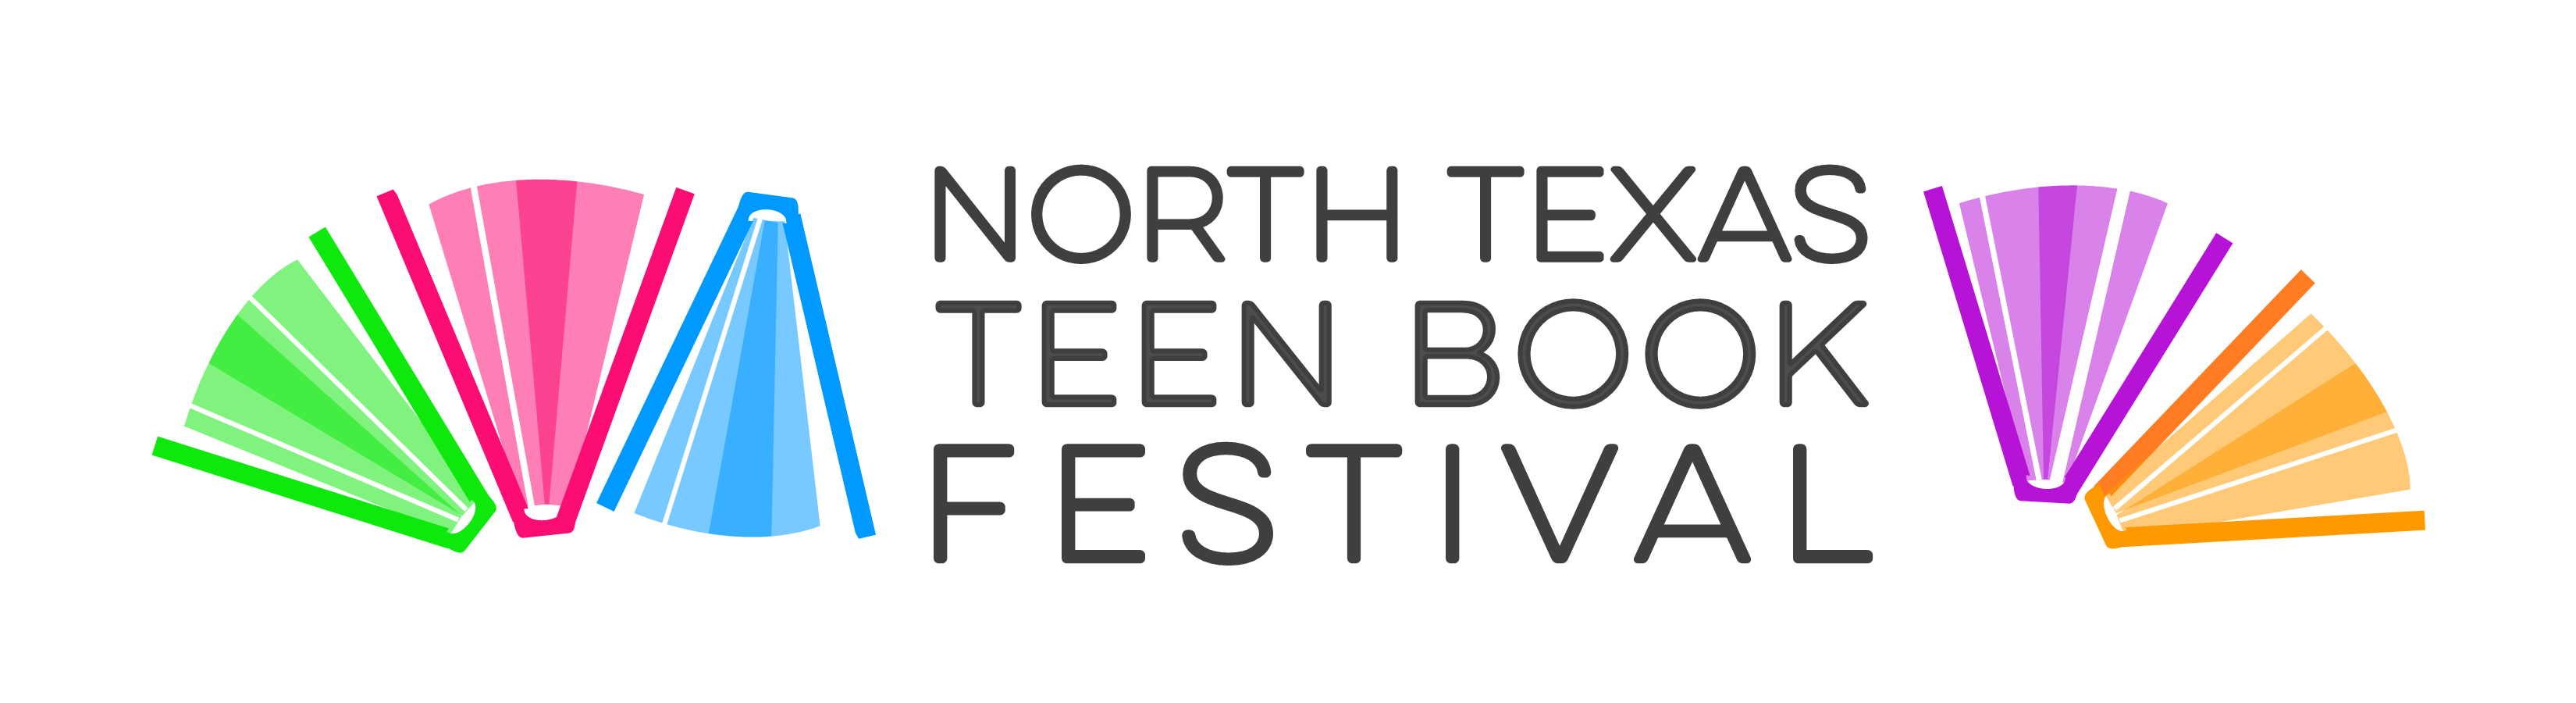 small ntxbook fest